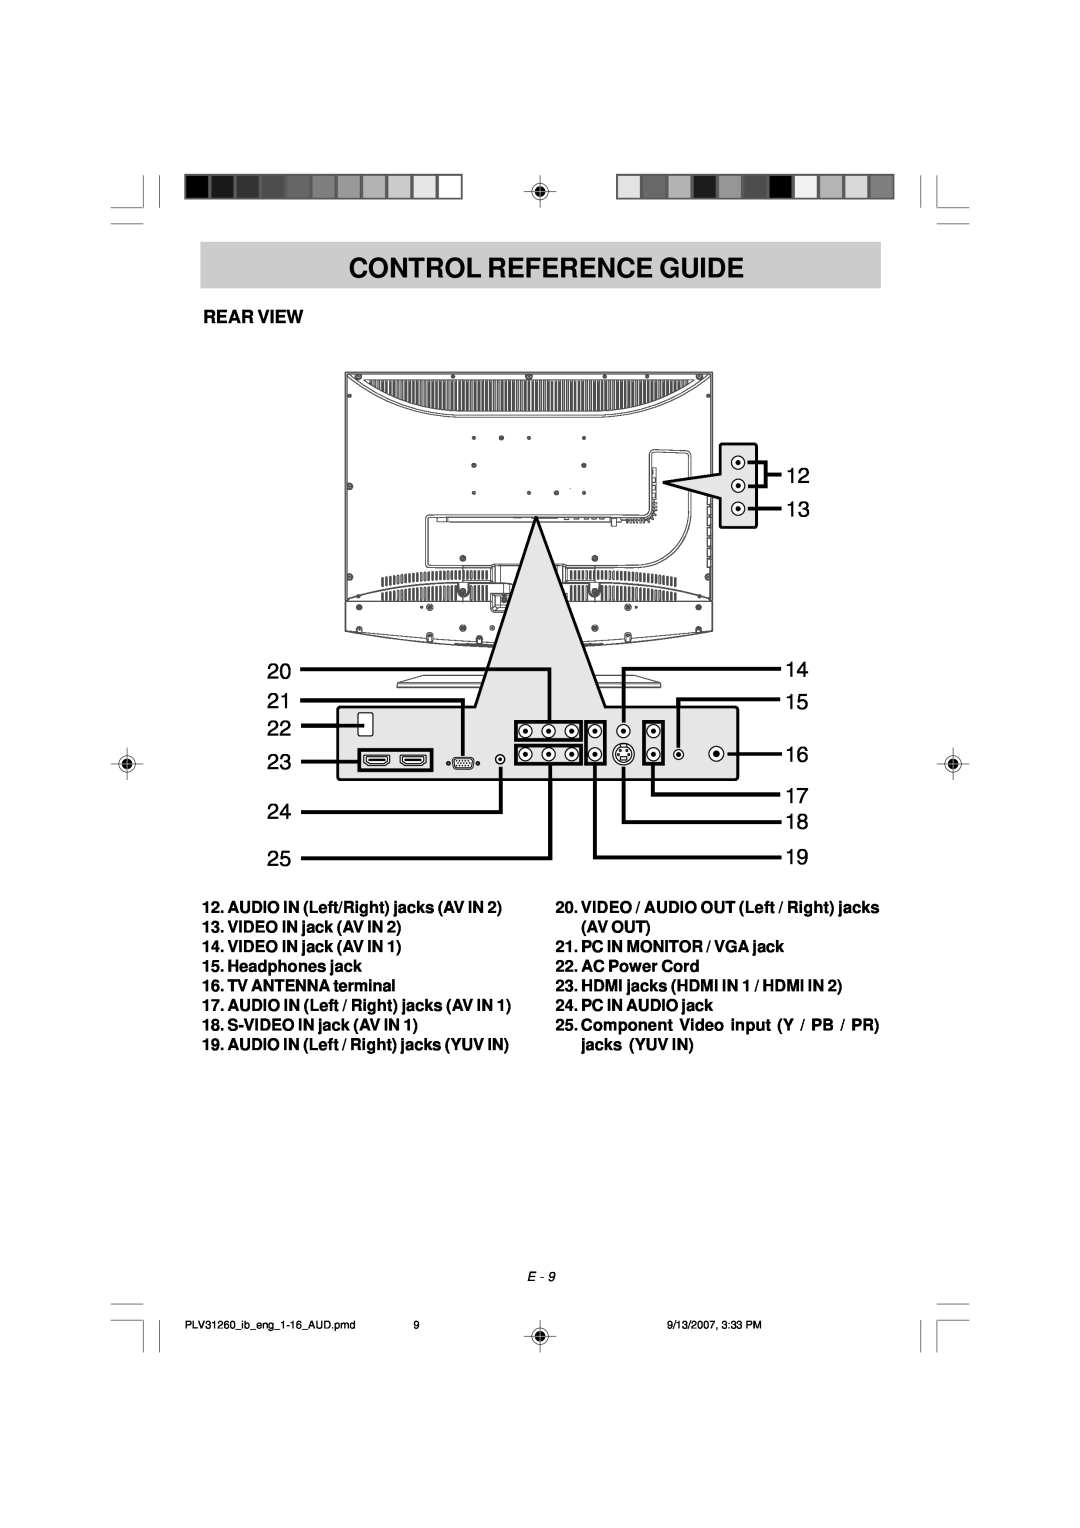 Audiovox FPE2607DV owner manual Rear View, Control Reference Guide 